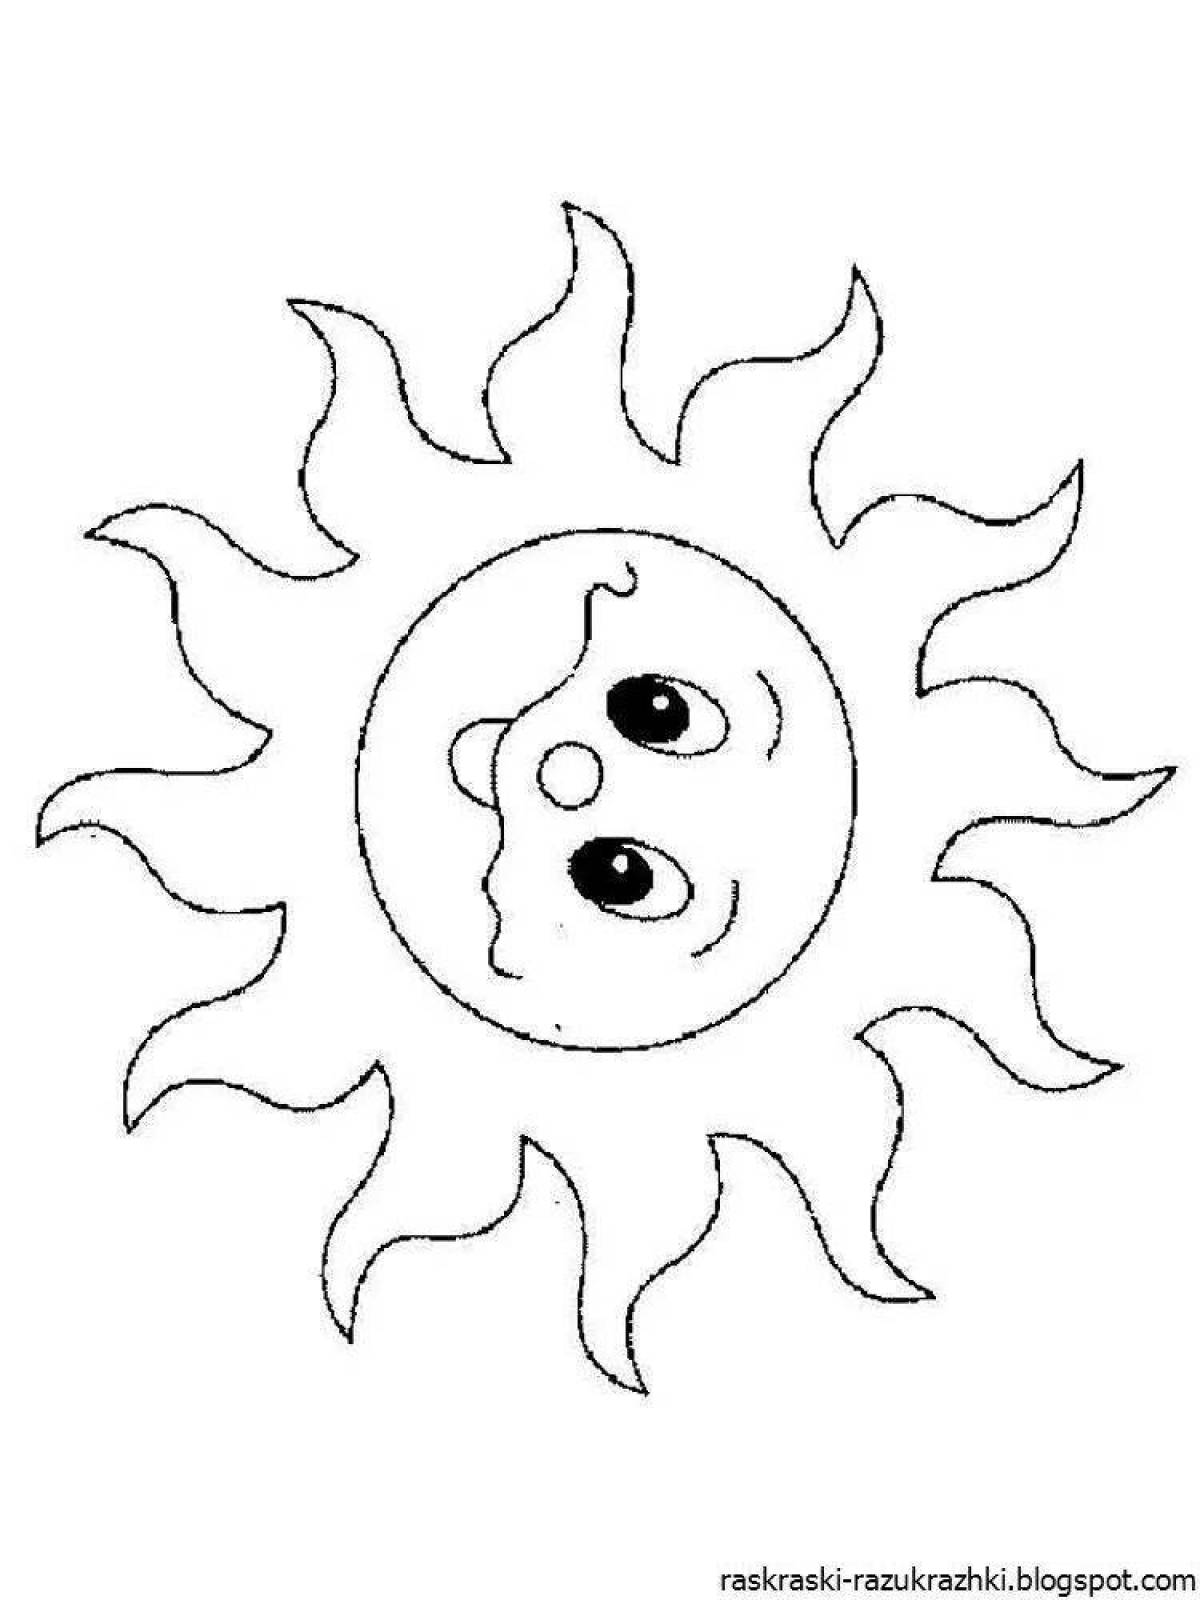 Colorful sun coloring book for kids